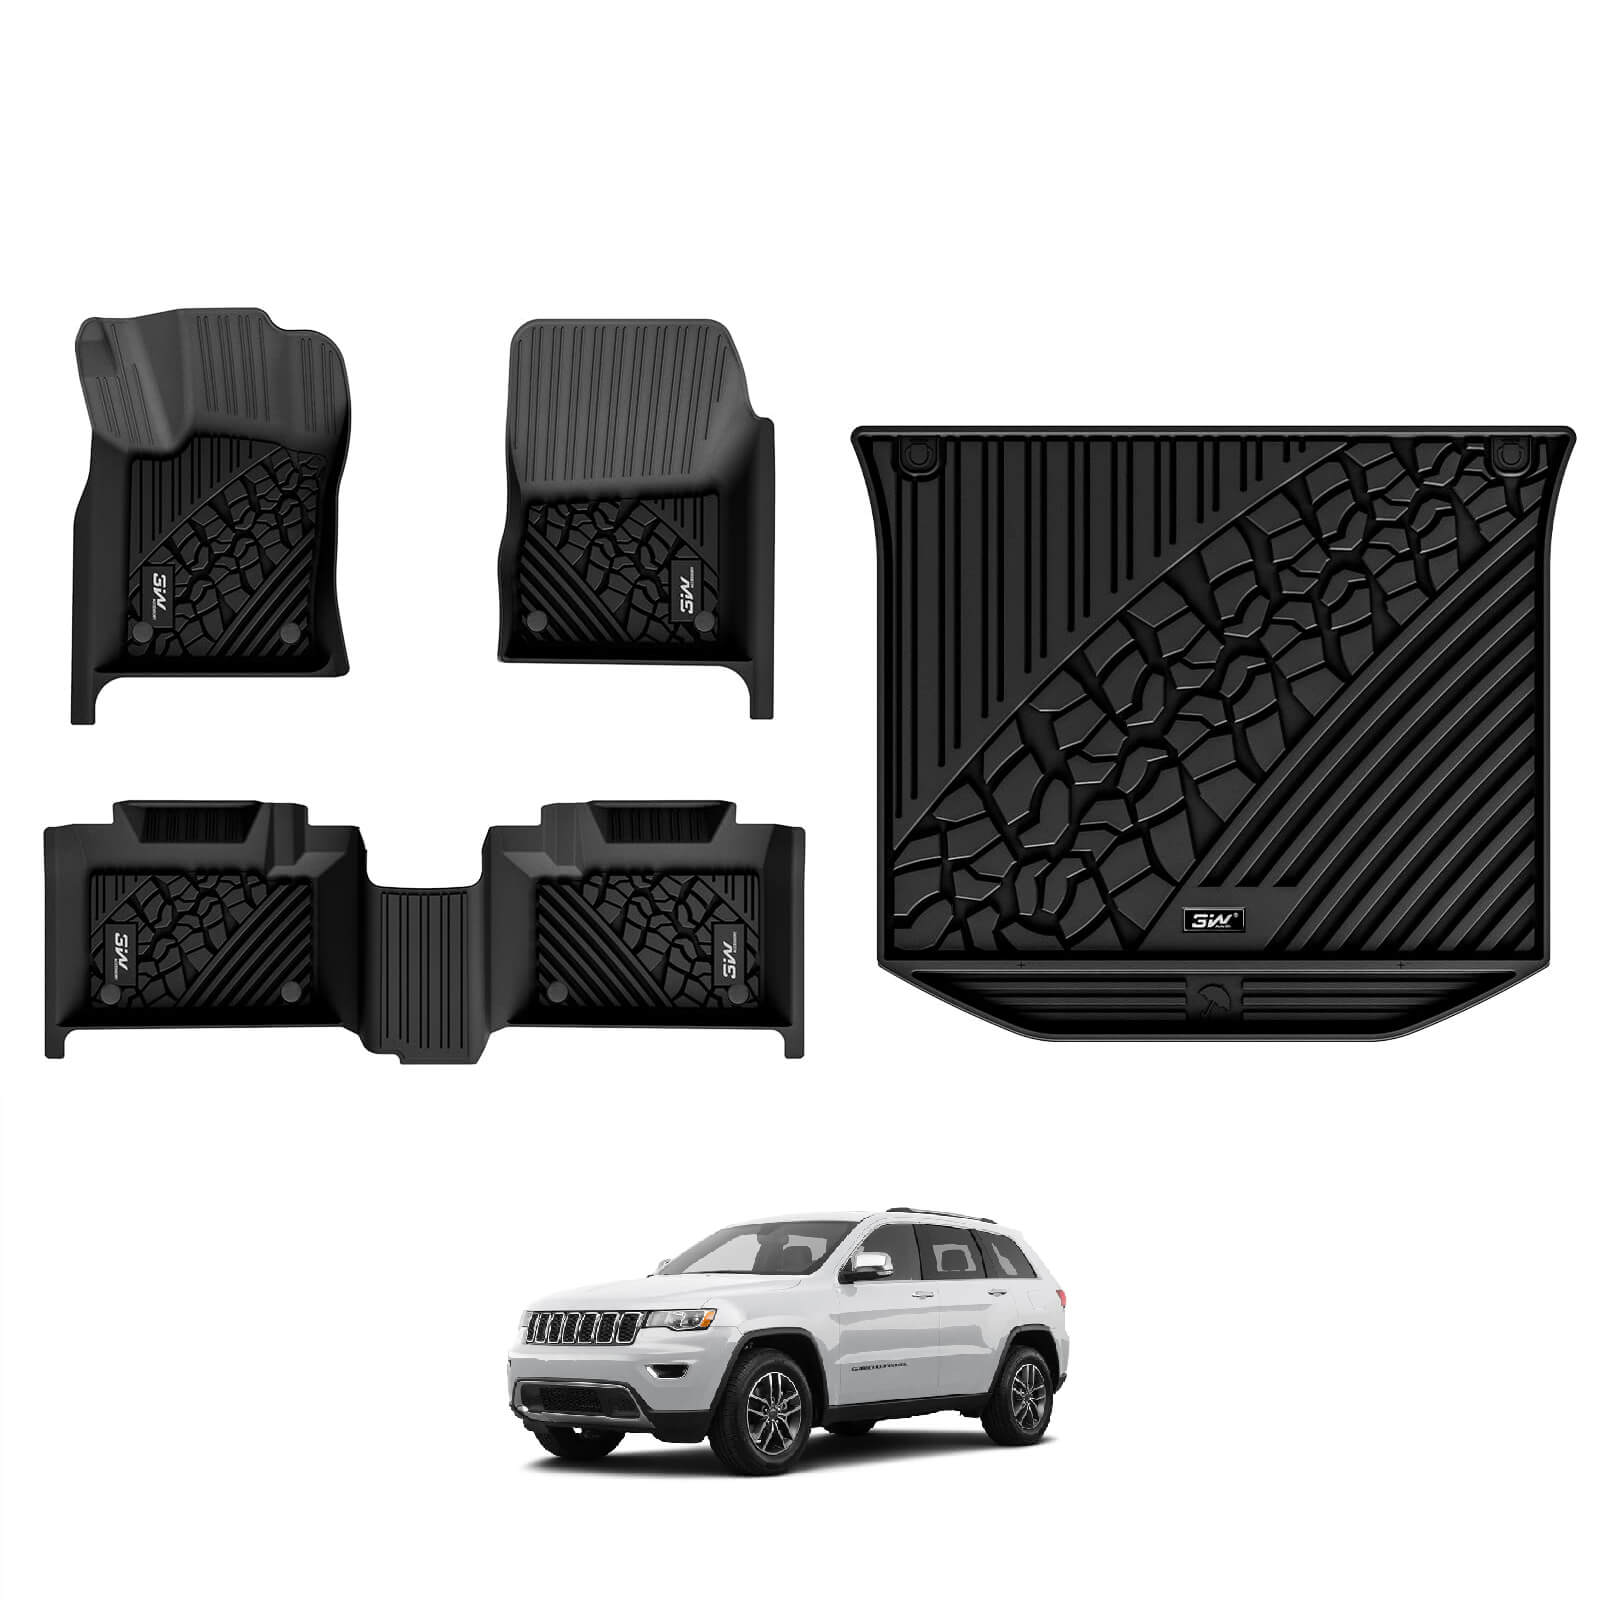 3W Floor Mats Jeep Grand Cherokee 2016-2021 / Grand Cherokee WK 2022-2023 (Non L) Custom Cargo Liner TPE Material & All-Weather Protection Vehicles & Parts 3Wliners 2016-2021 Grand Cherokee 2016-2021 1st&2nd Row Mats+Trunk Mat